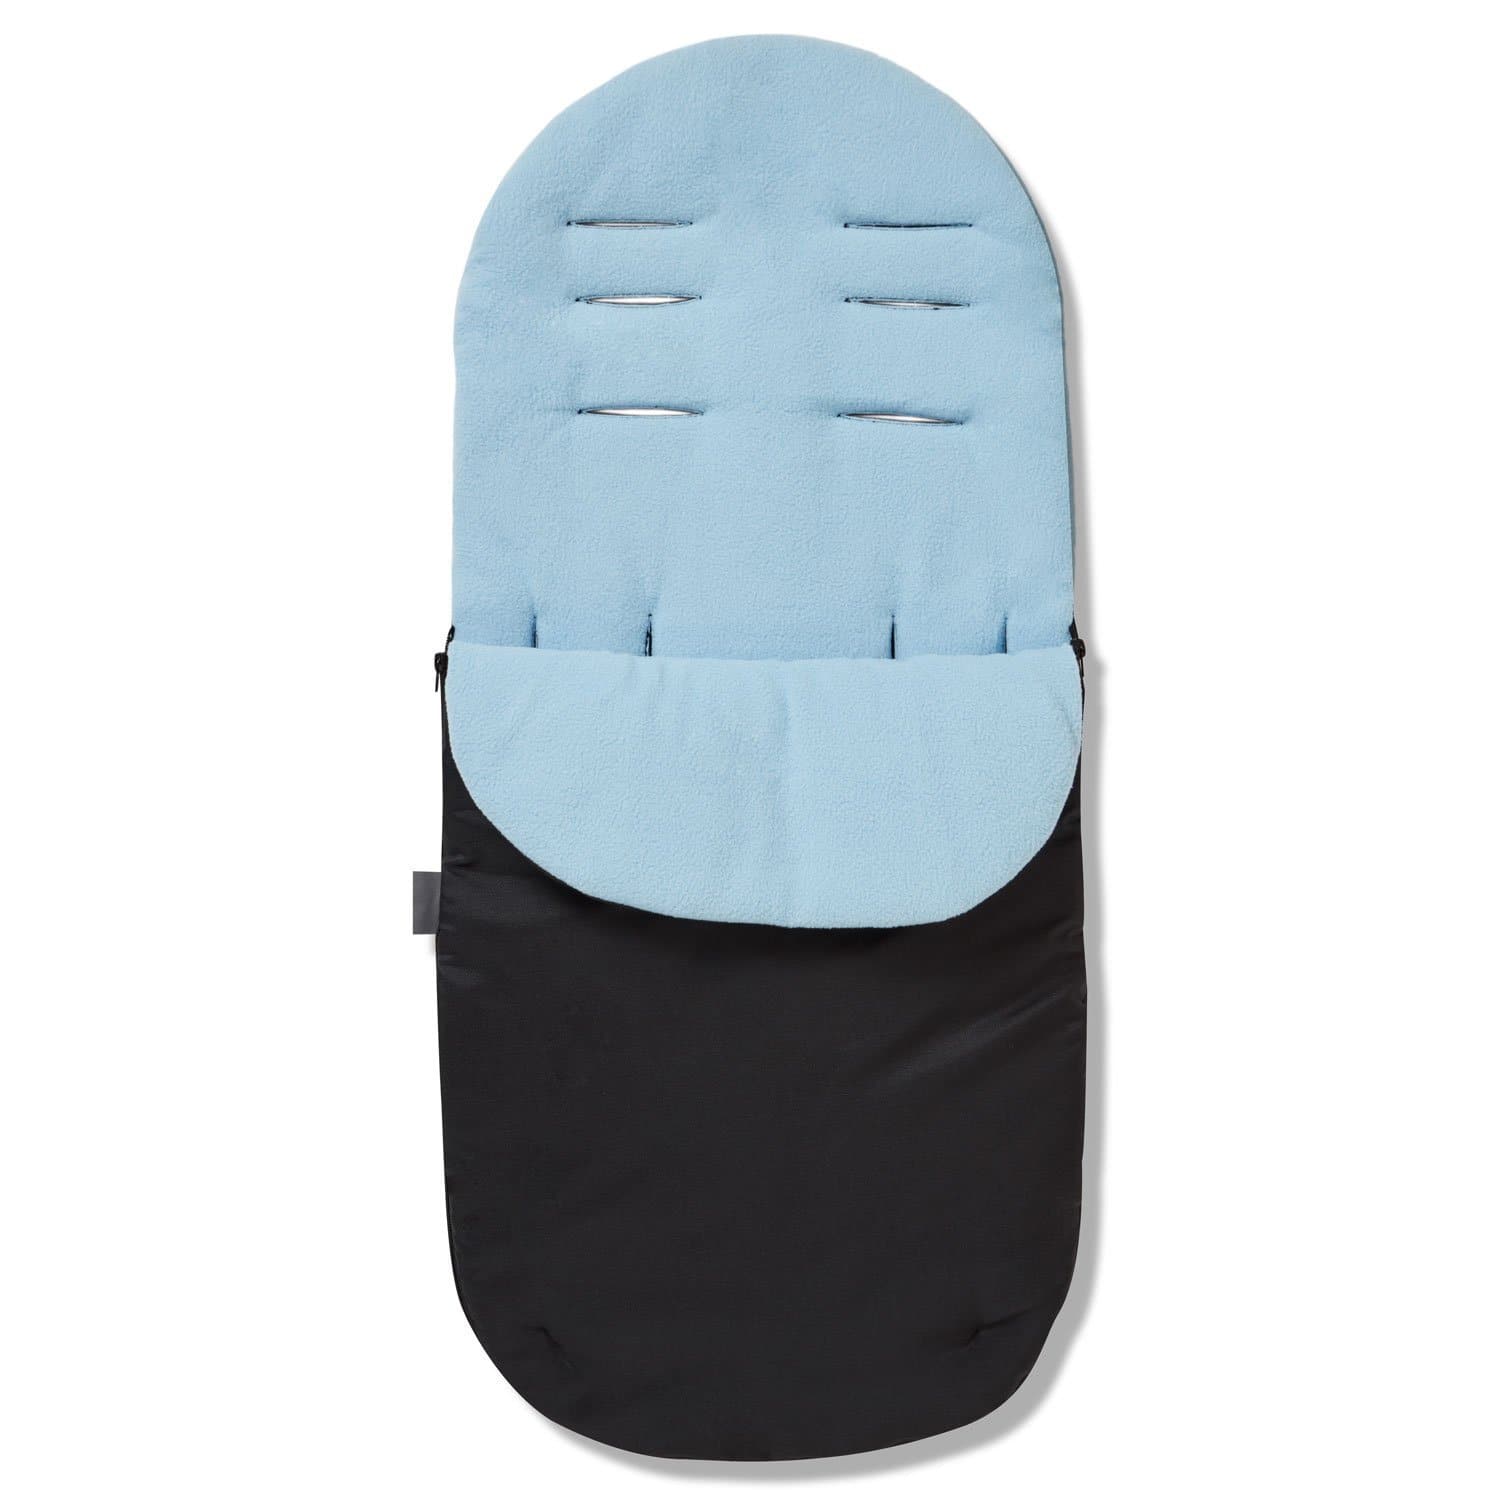 Footmuff / Cosy Toes Compatible with Kids Kargo - Light Blue / Fits All Models | For Your Little One